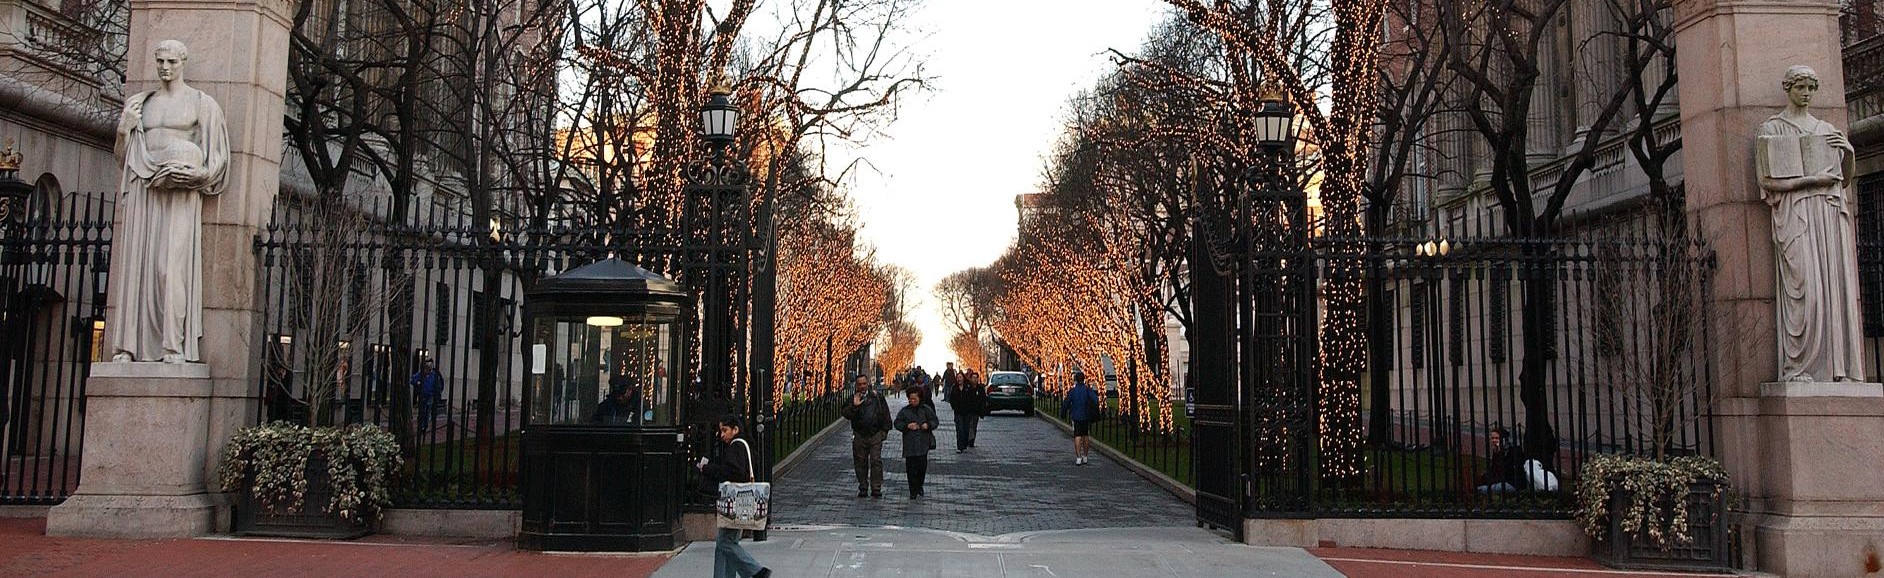 Image of College Walk on Columbia campus where students walk to different buildings.